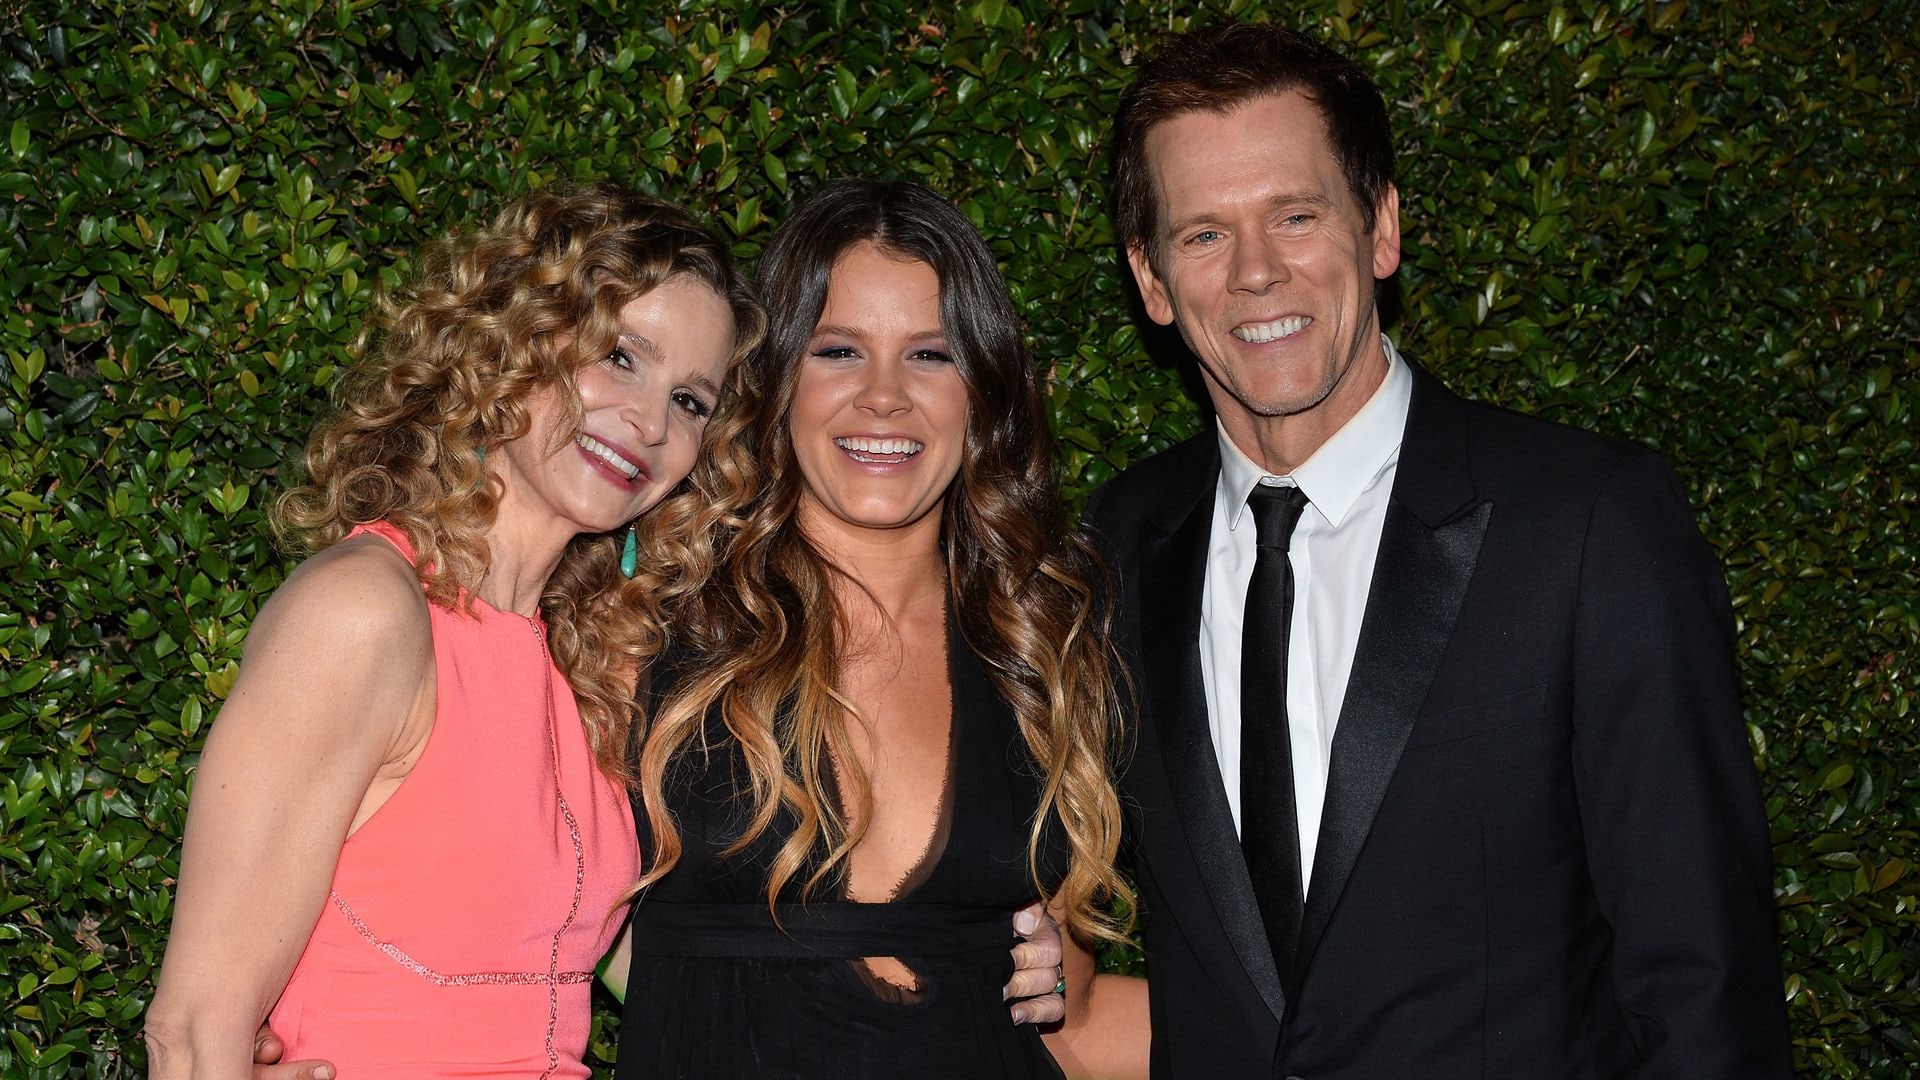 Kevin, Sosie and Kyra smiling wide on the red carpet for a party in 2014